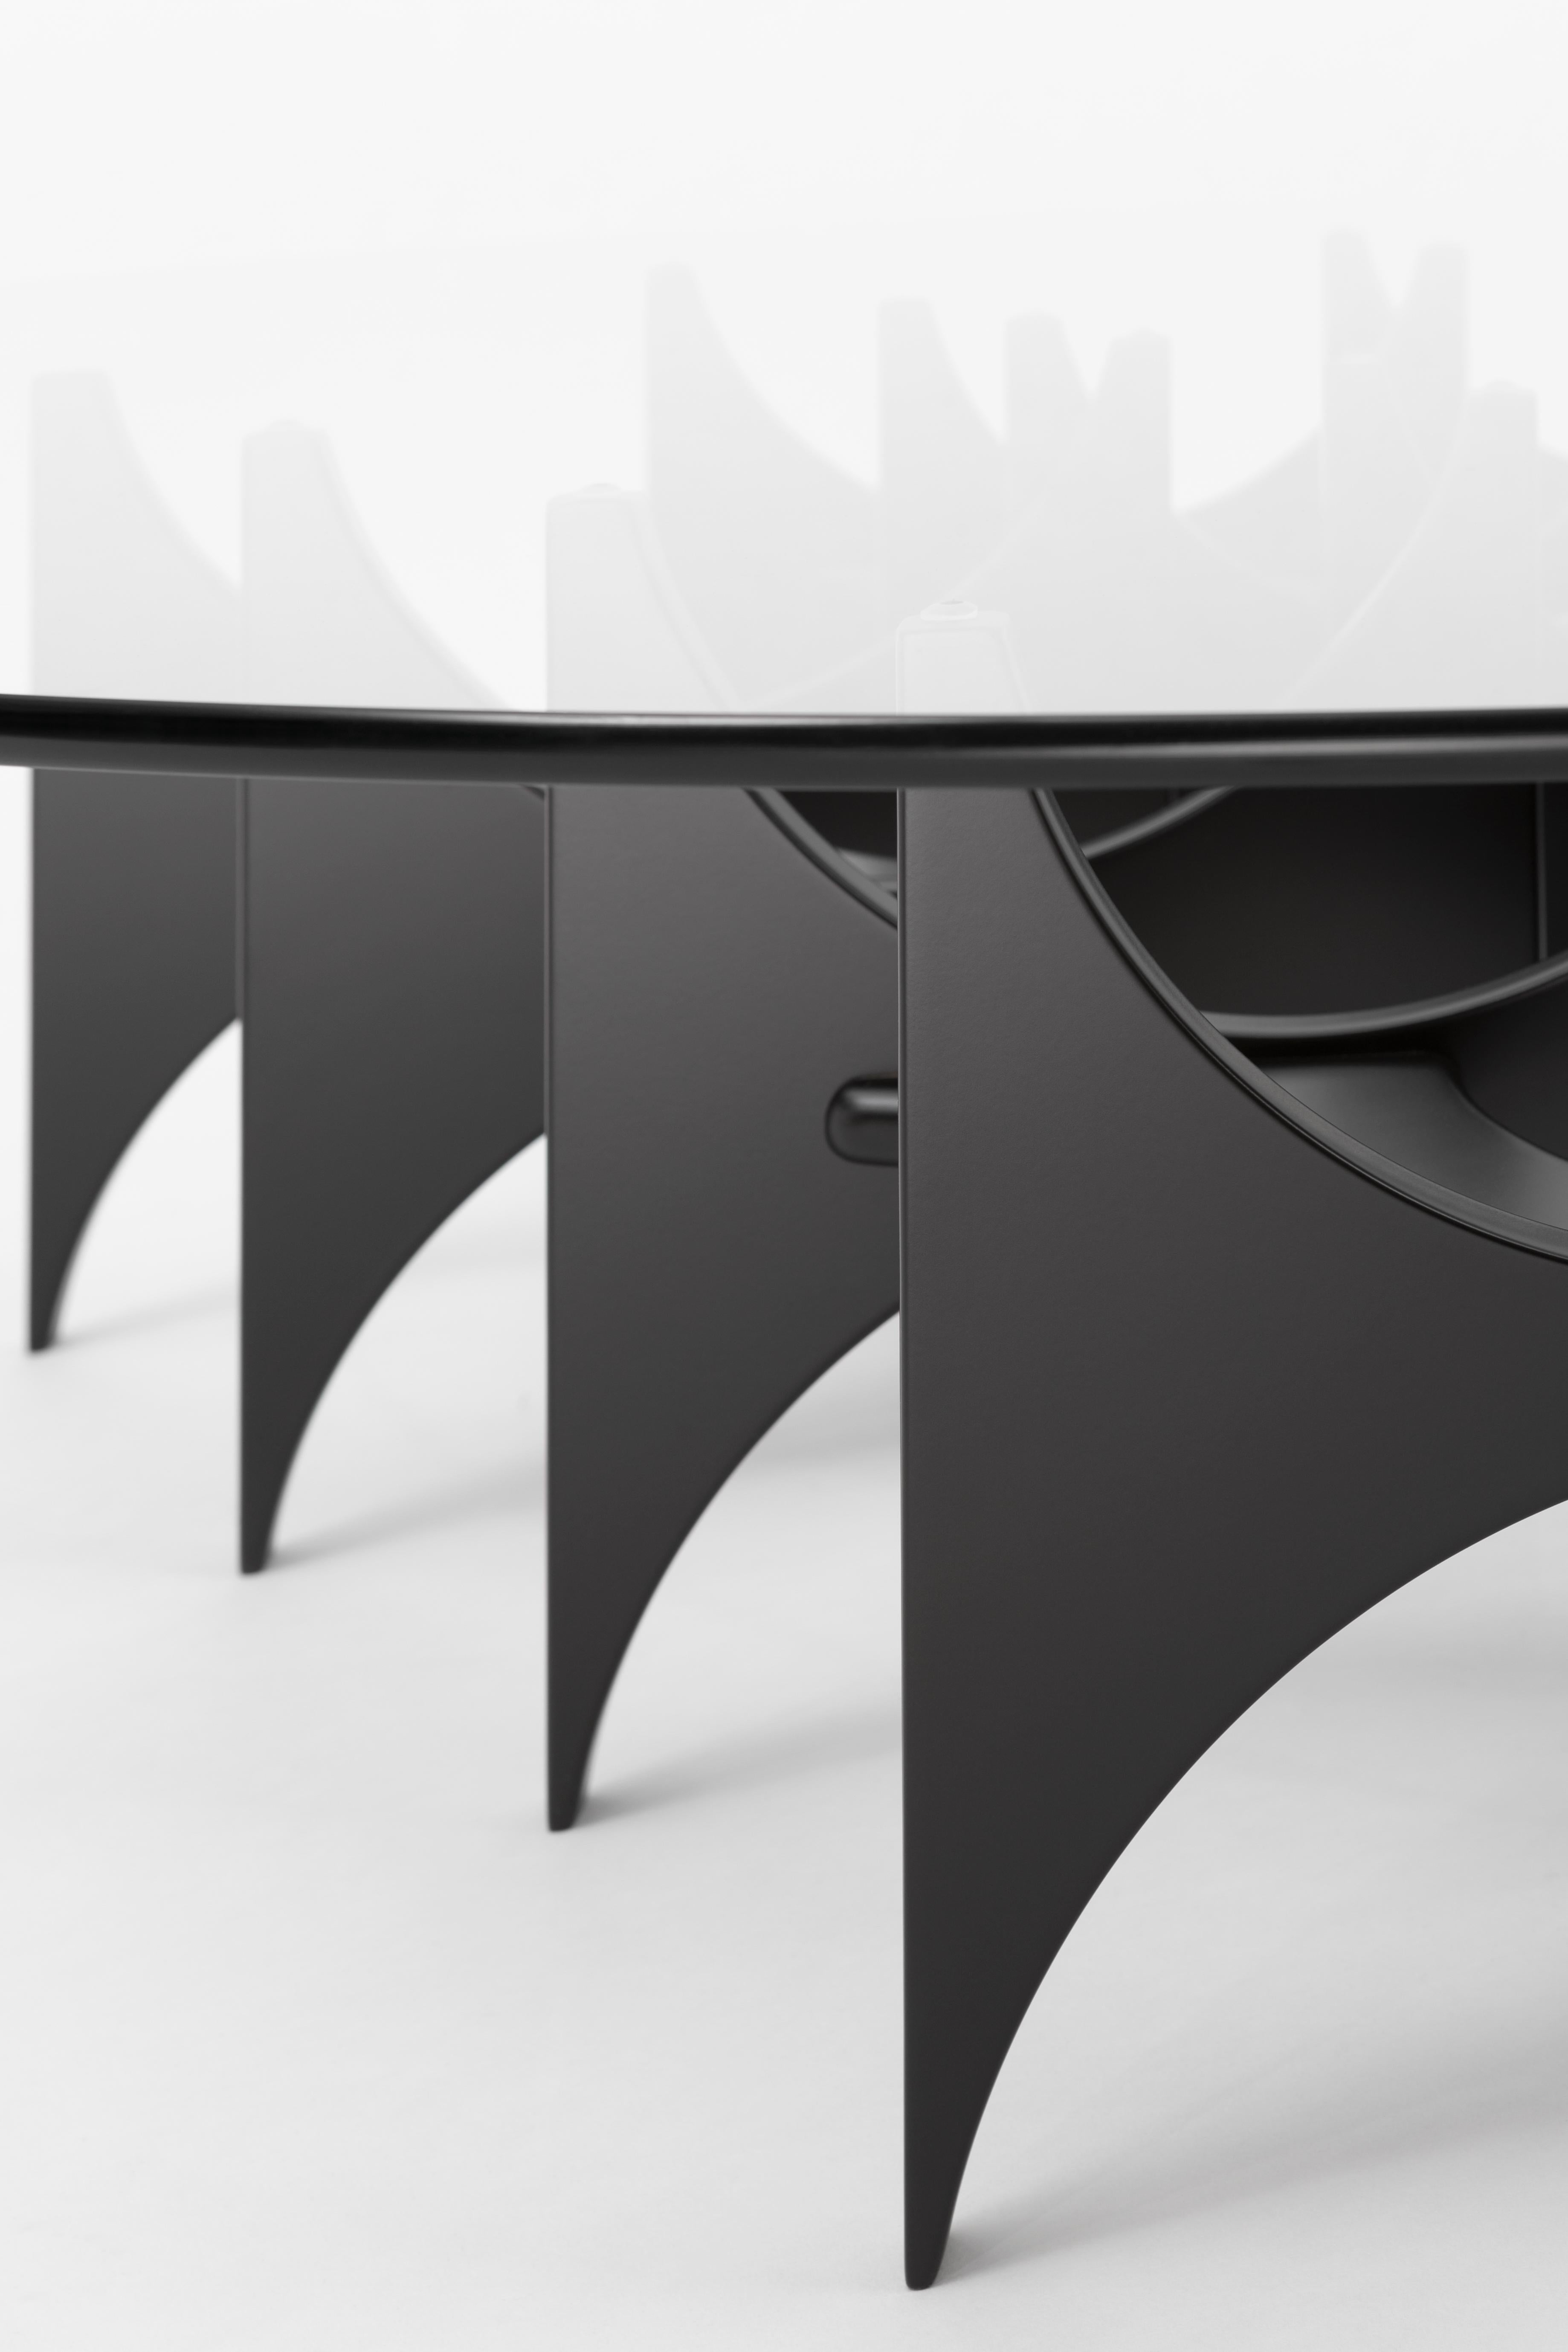 The 'Butterfly' coffee table is also a new entry to the 'Paesaggio' collection. Hannes Peer translated the biomorphic aesthetic of his 'Butterfly' console into a low table with equally distinctive organic forms. The top is made of tempered glass,